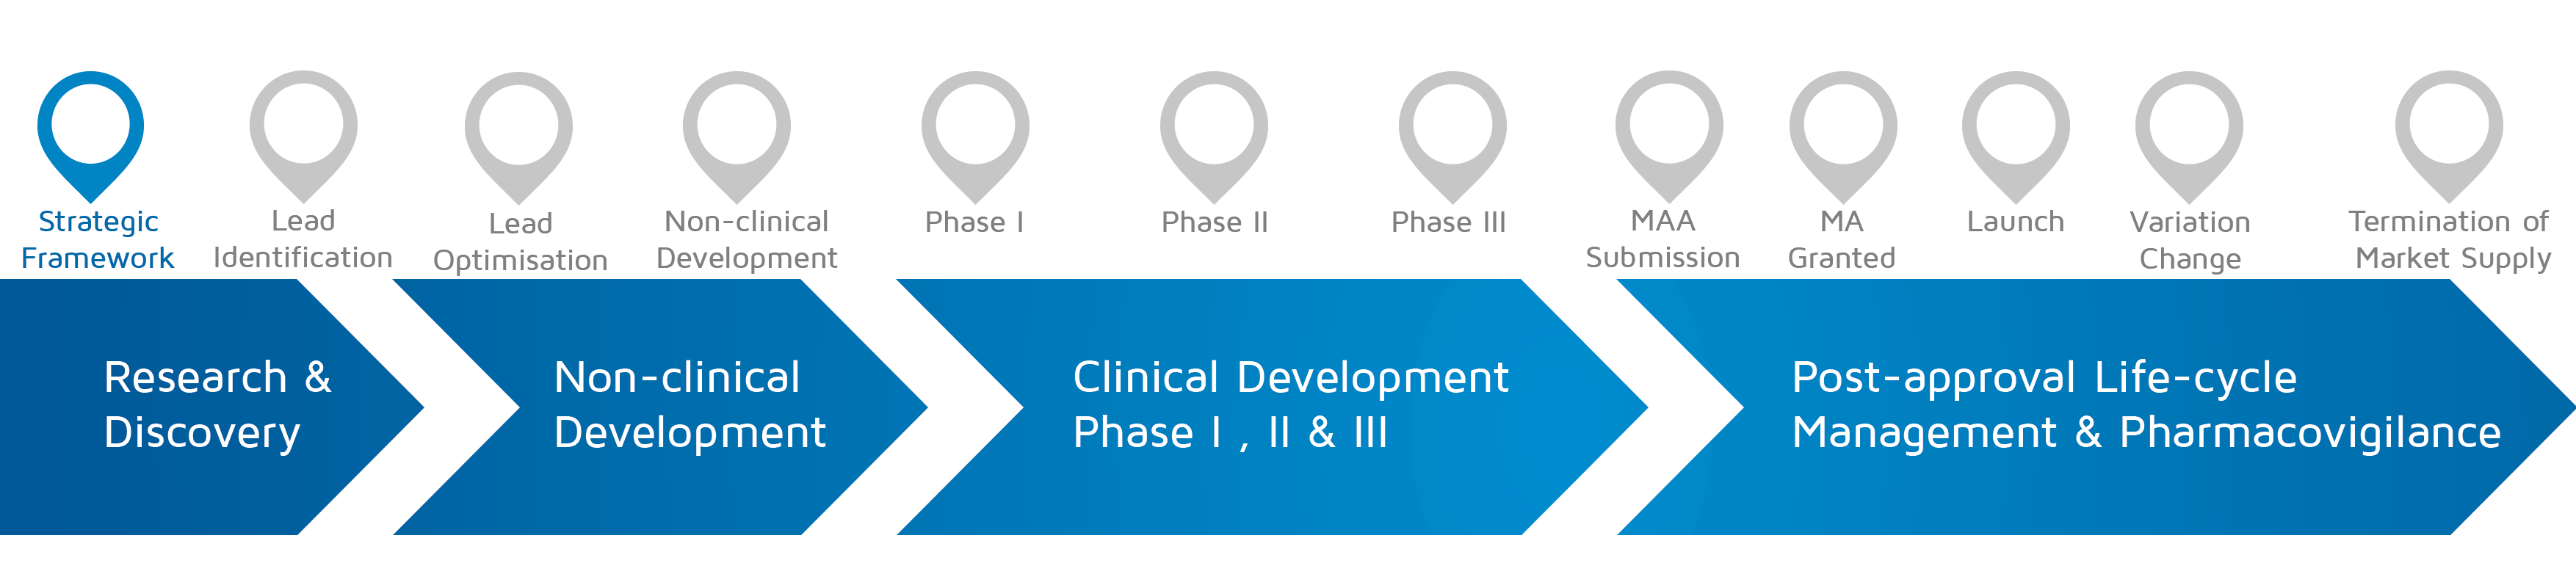 A visual representation of in which phase of medicines research and development process an activity takes place with strategic framework highlighted.